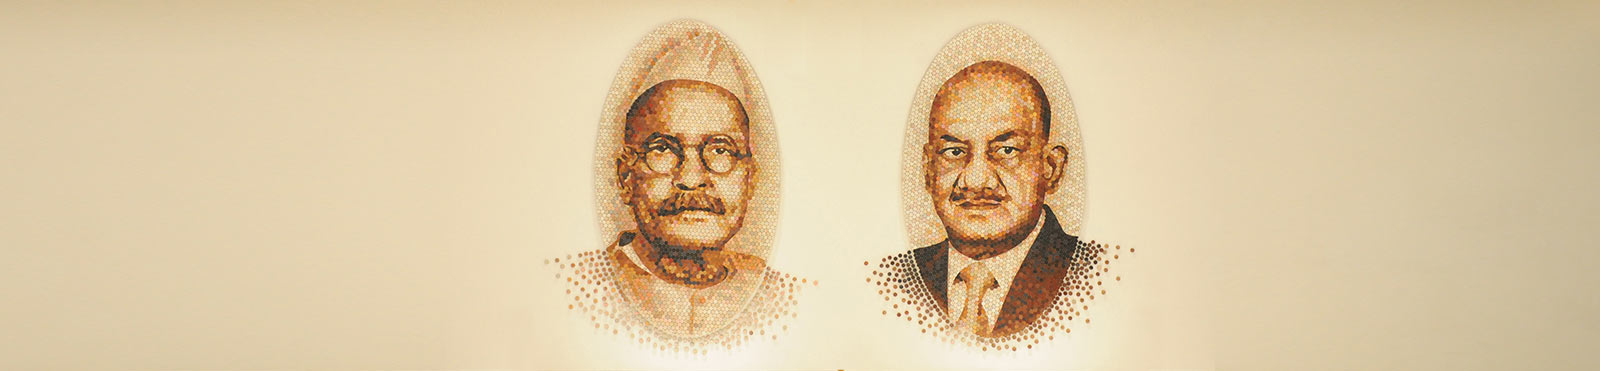 Founders of DS Group - Dharampal & Satyapal